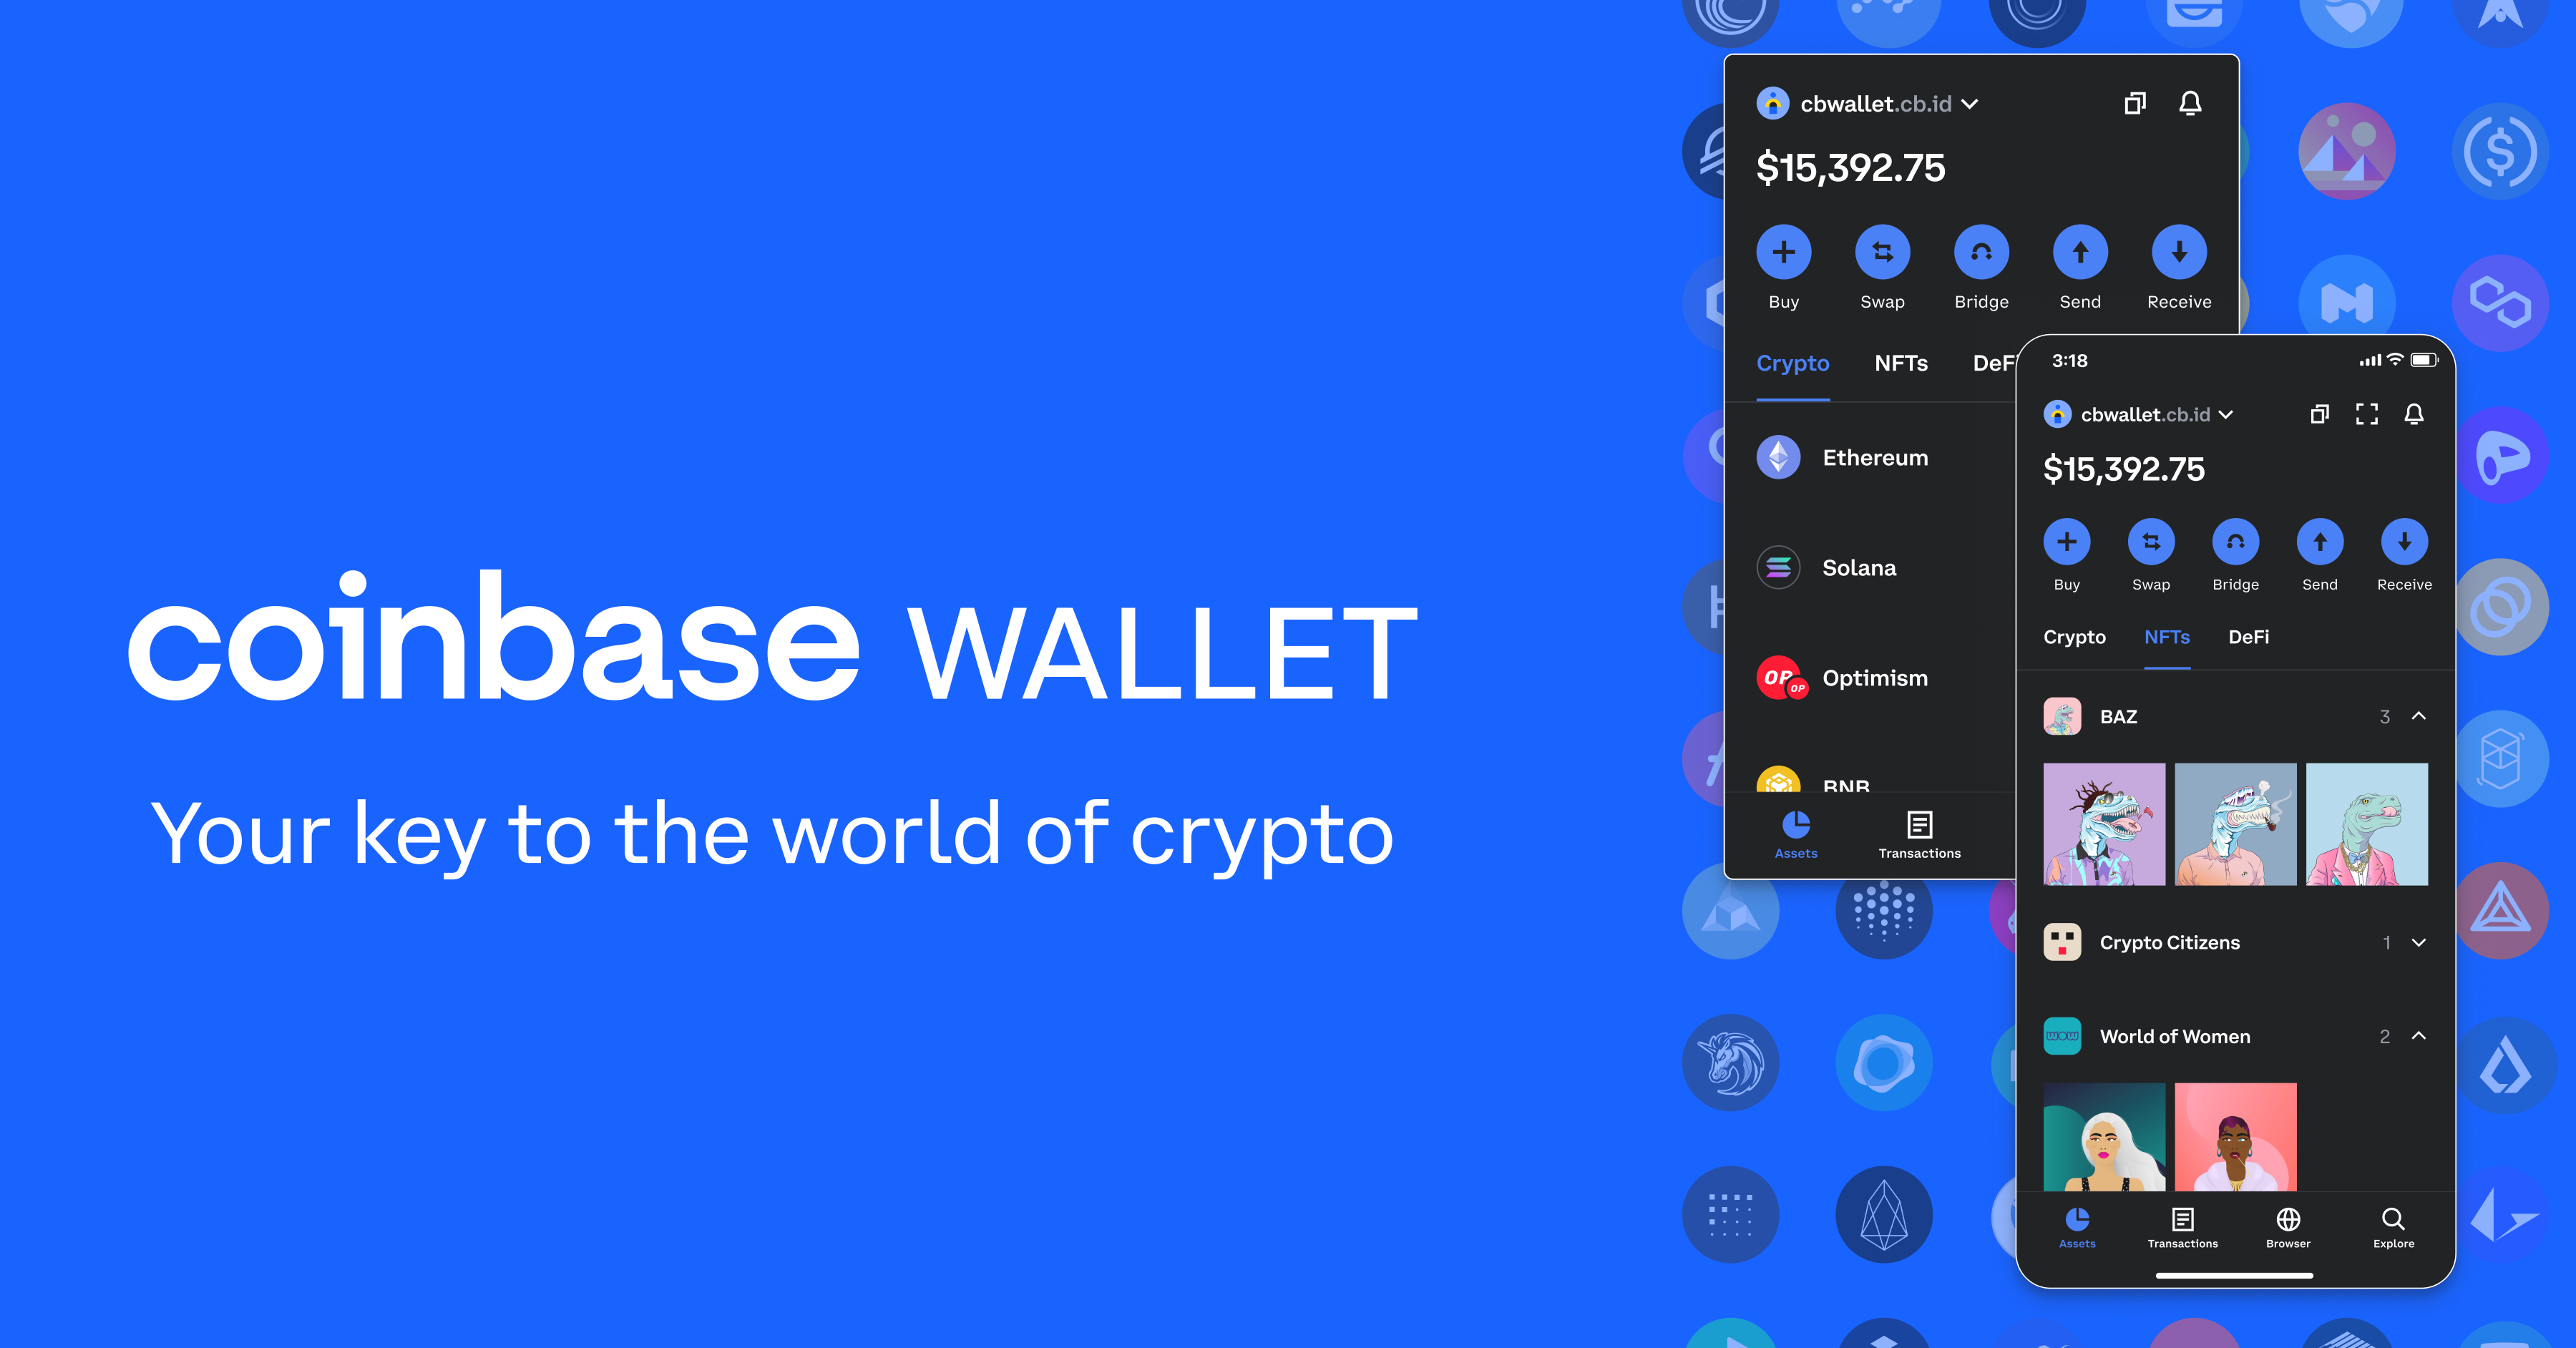 Coinbase Exchange wallet